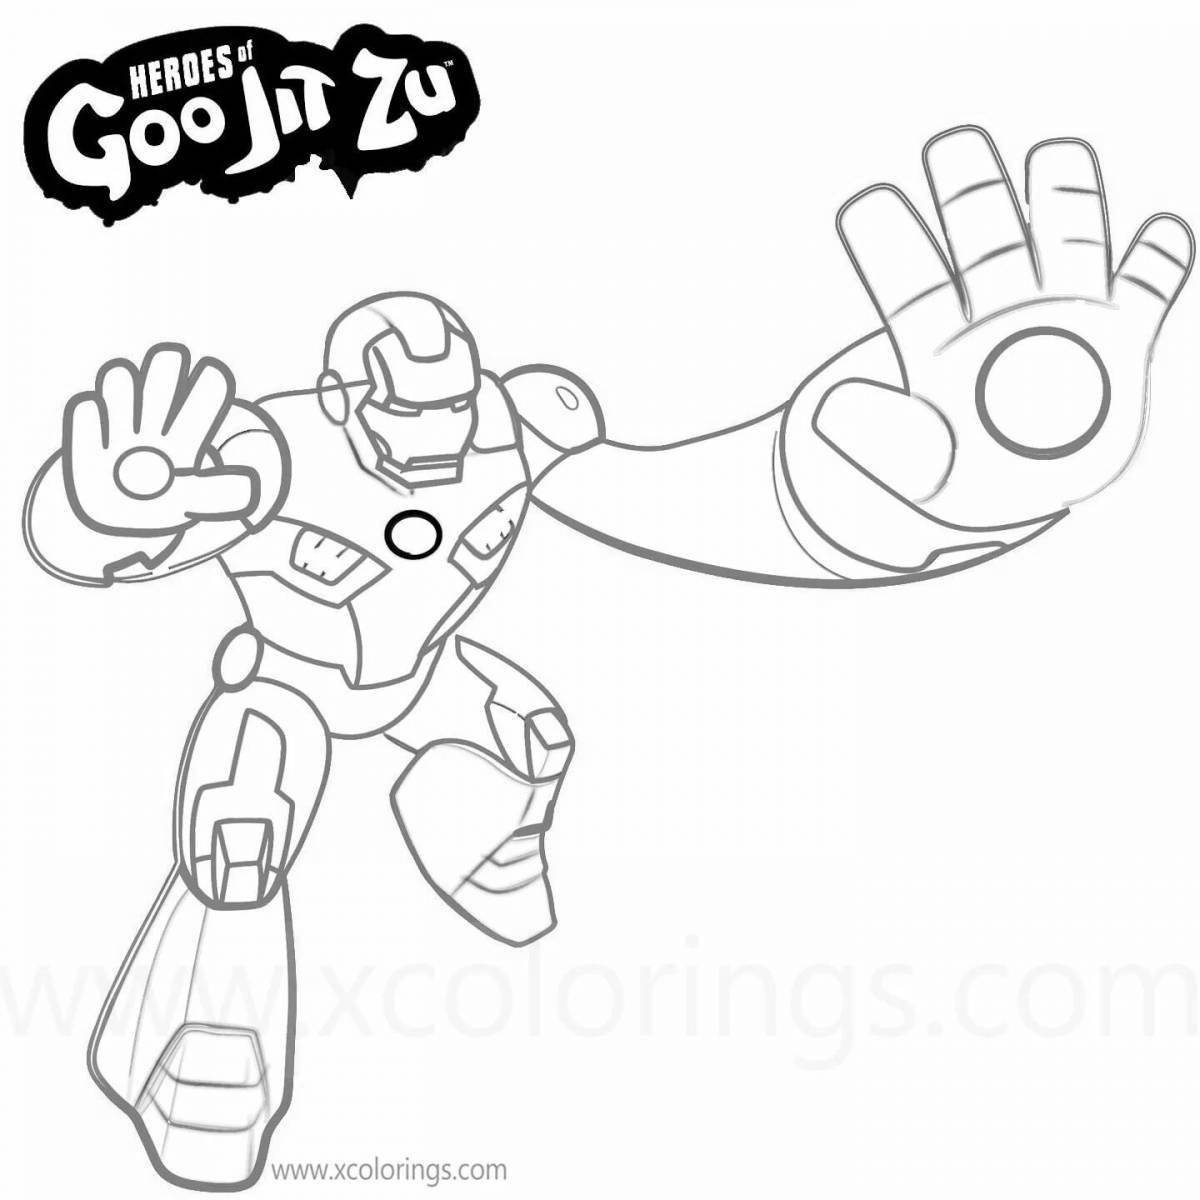 Colorful goojitzu coloring page